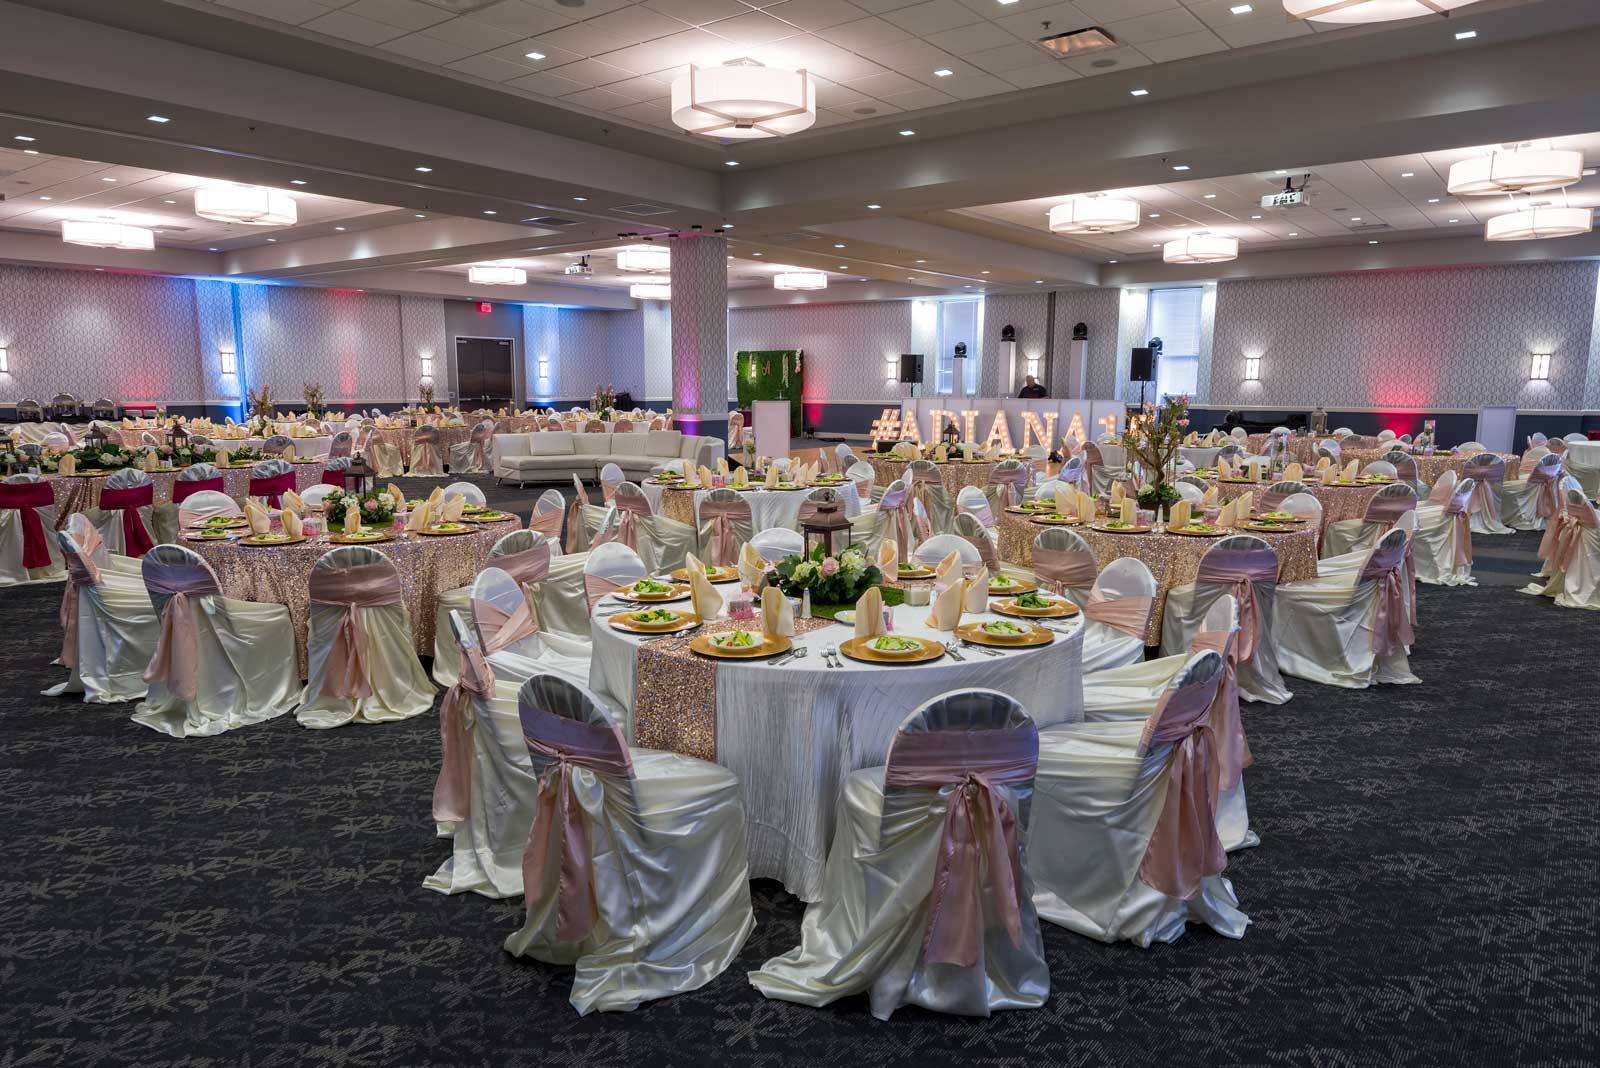 Fabulous Quinceanera at the Red Oak Ballroom in San Antonio featuring Upgraded Table Linens with Runners, Chair Covers with Ties and Plate Chargers with Preset Salads